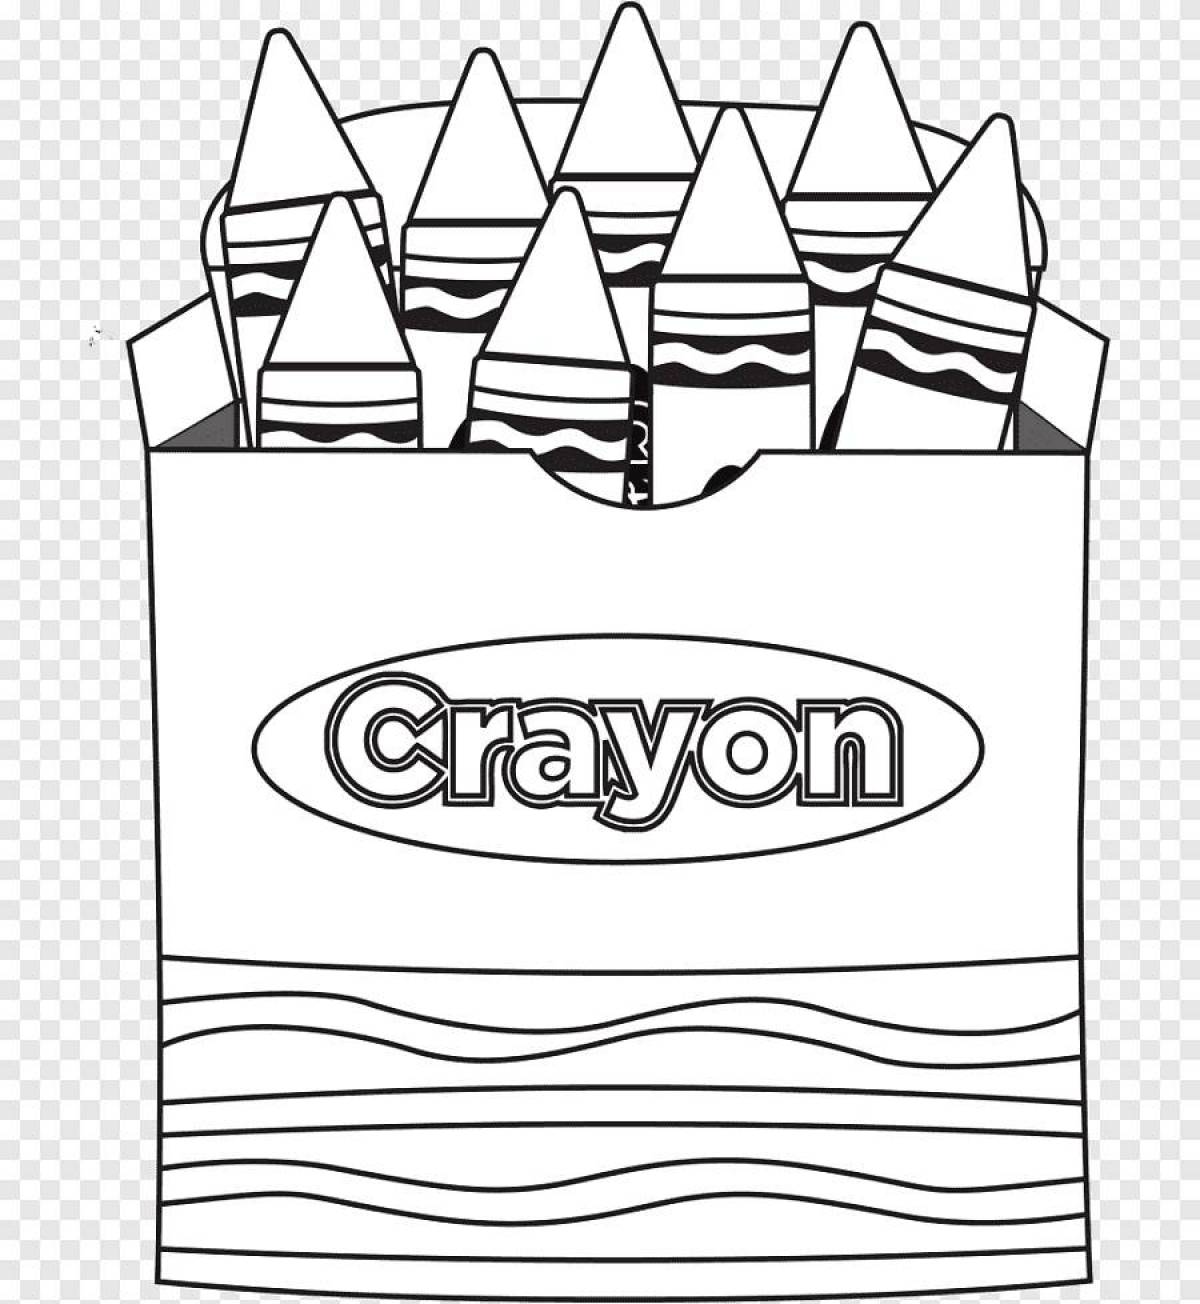 Awesome marker coloring page